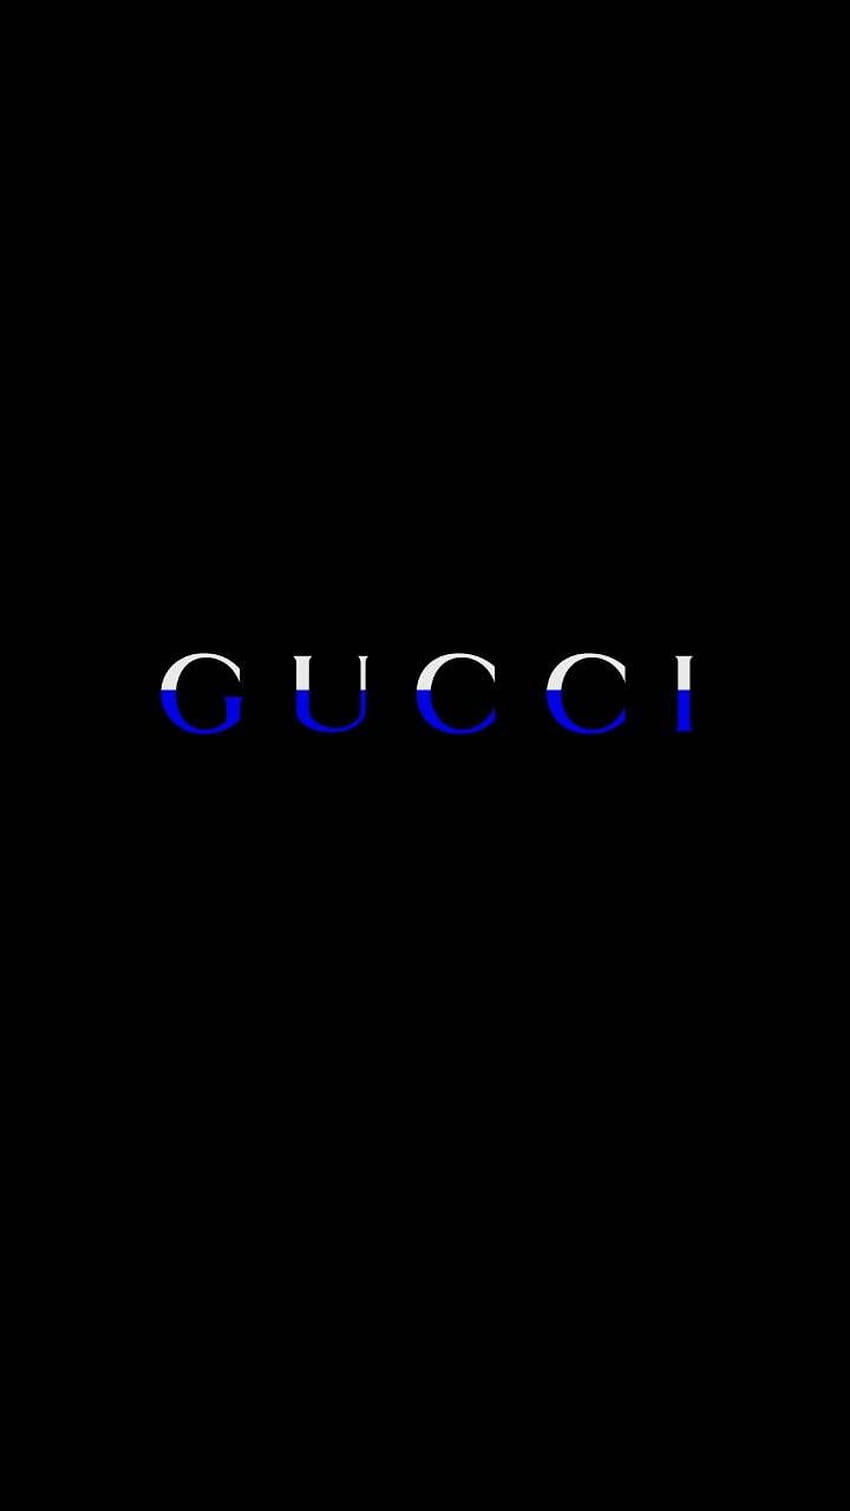 gucci by RyleighHanicq, gucci blue HD phone wallpaper